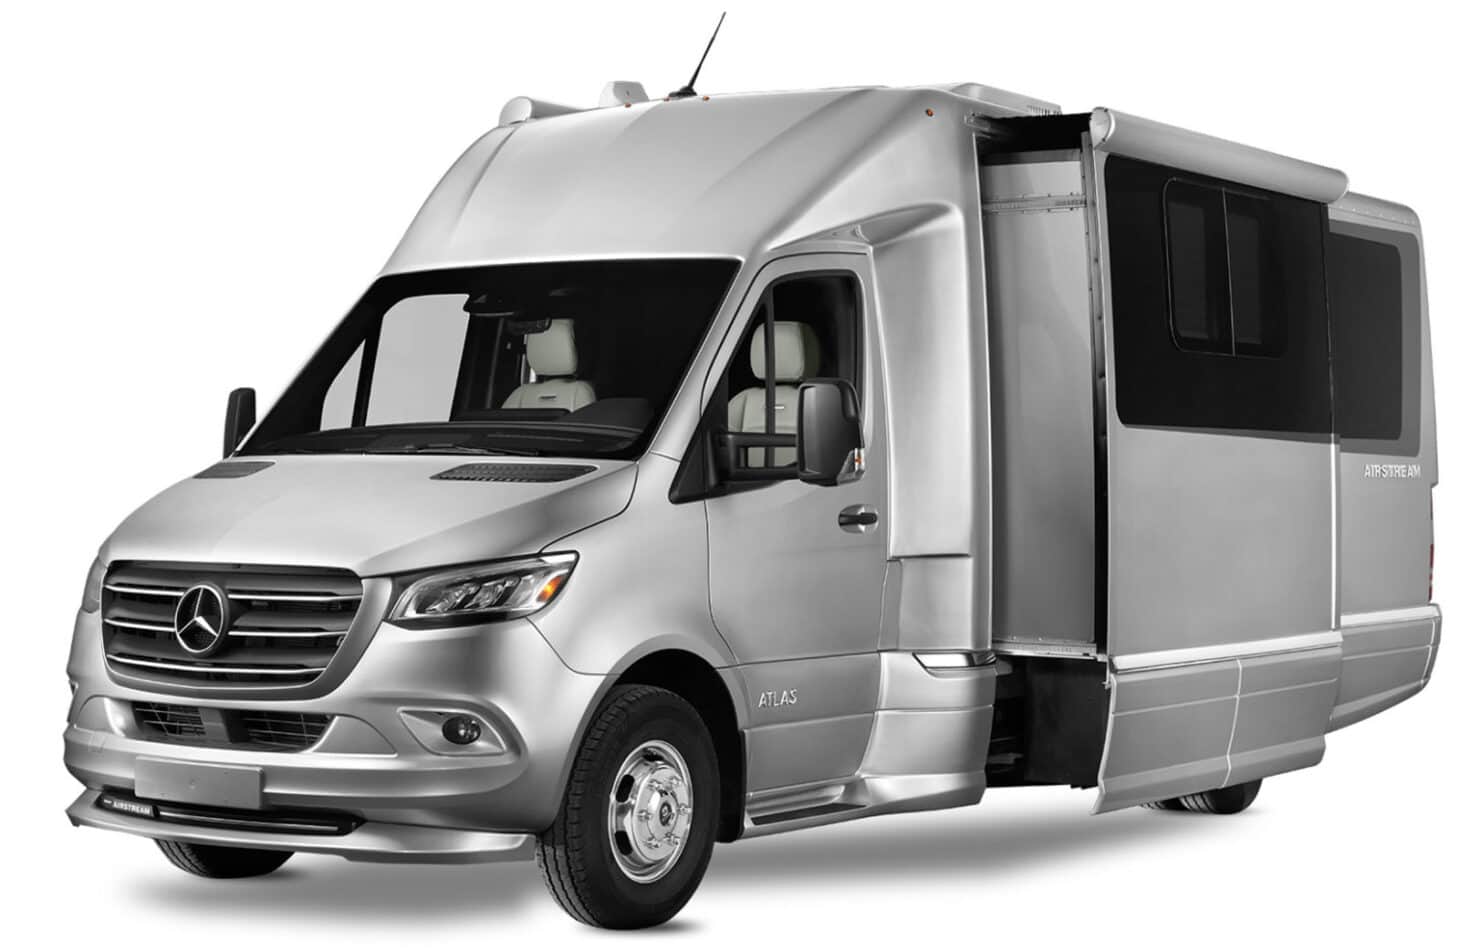 Exterior image of a silver Class B+ RV with an extended slide out